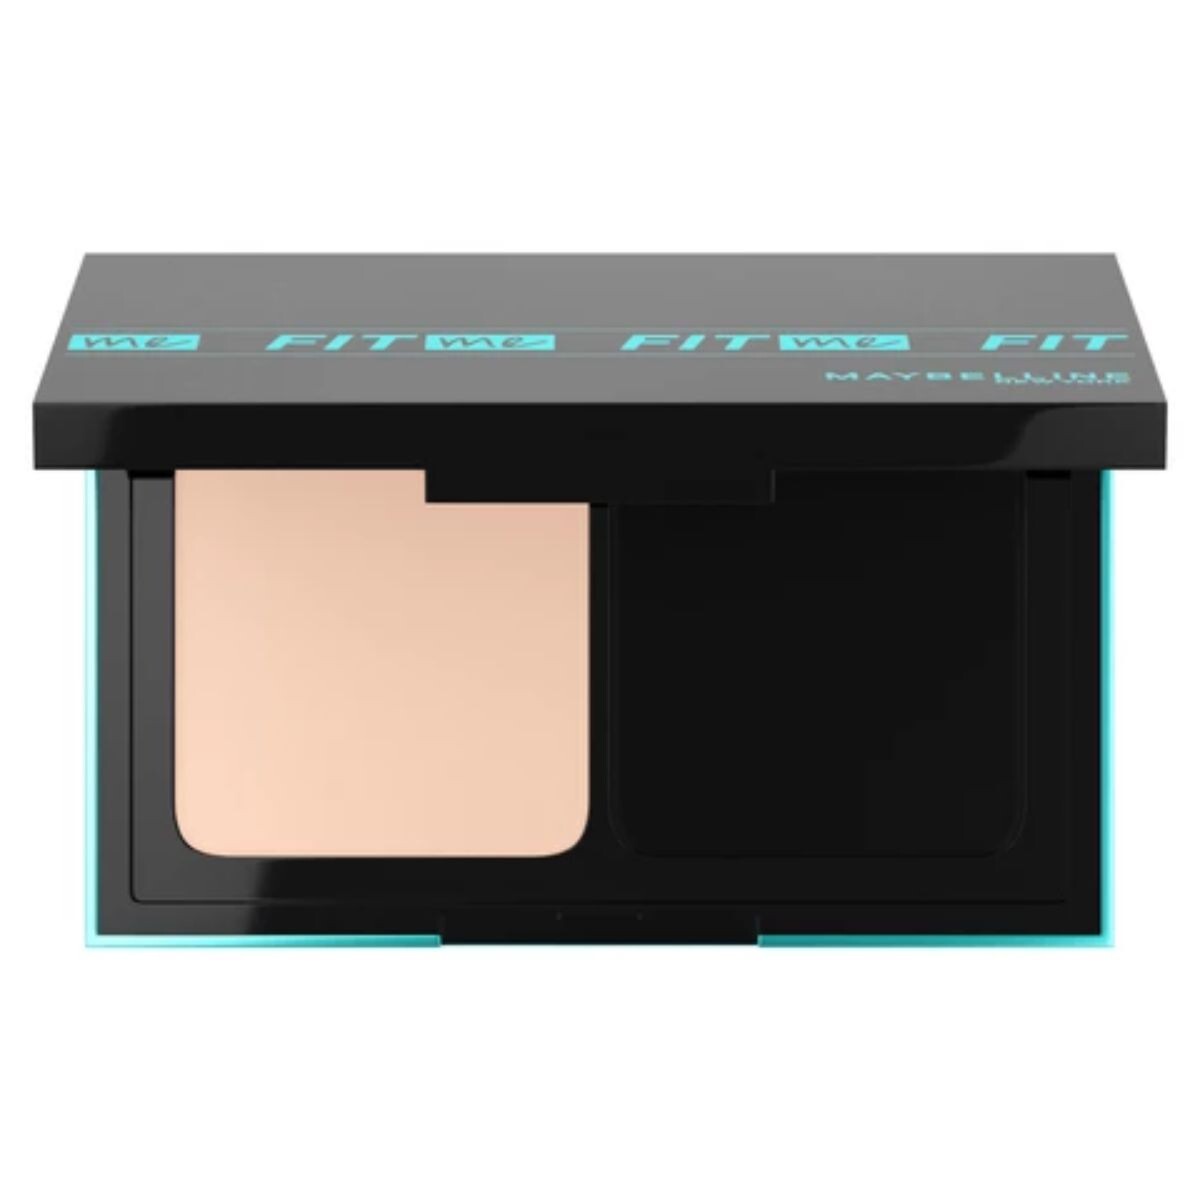 Polvo Compacto Maybelline Fit Me Poreless Powder Foundation 9g - Classic Ivory 120 